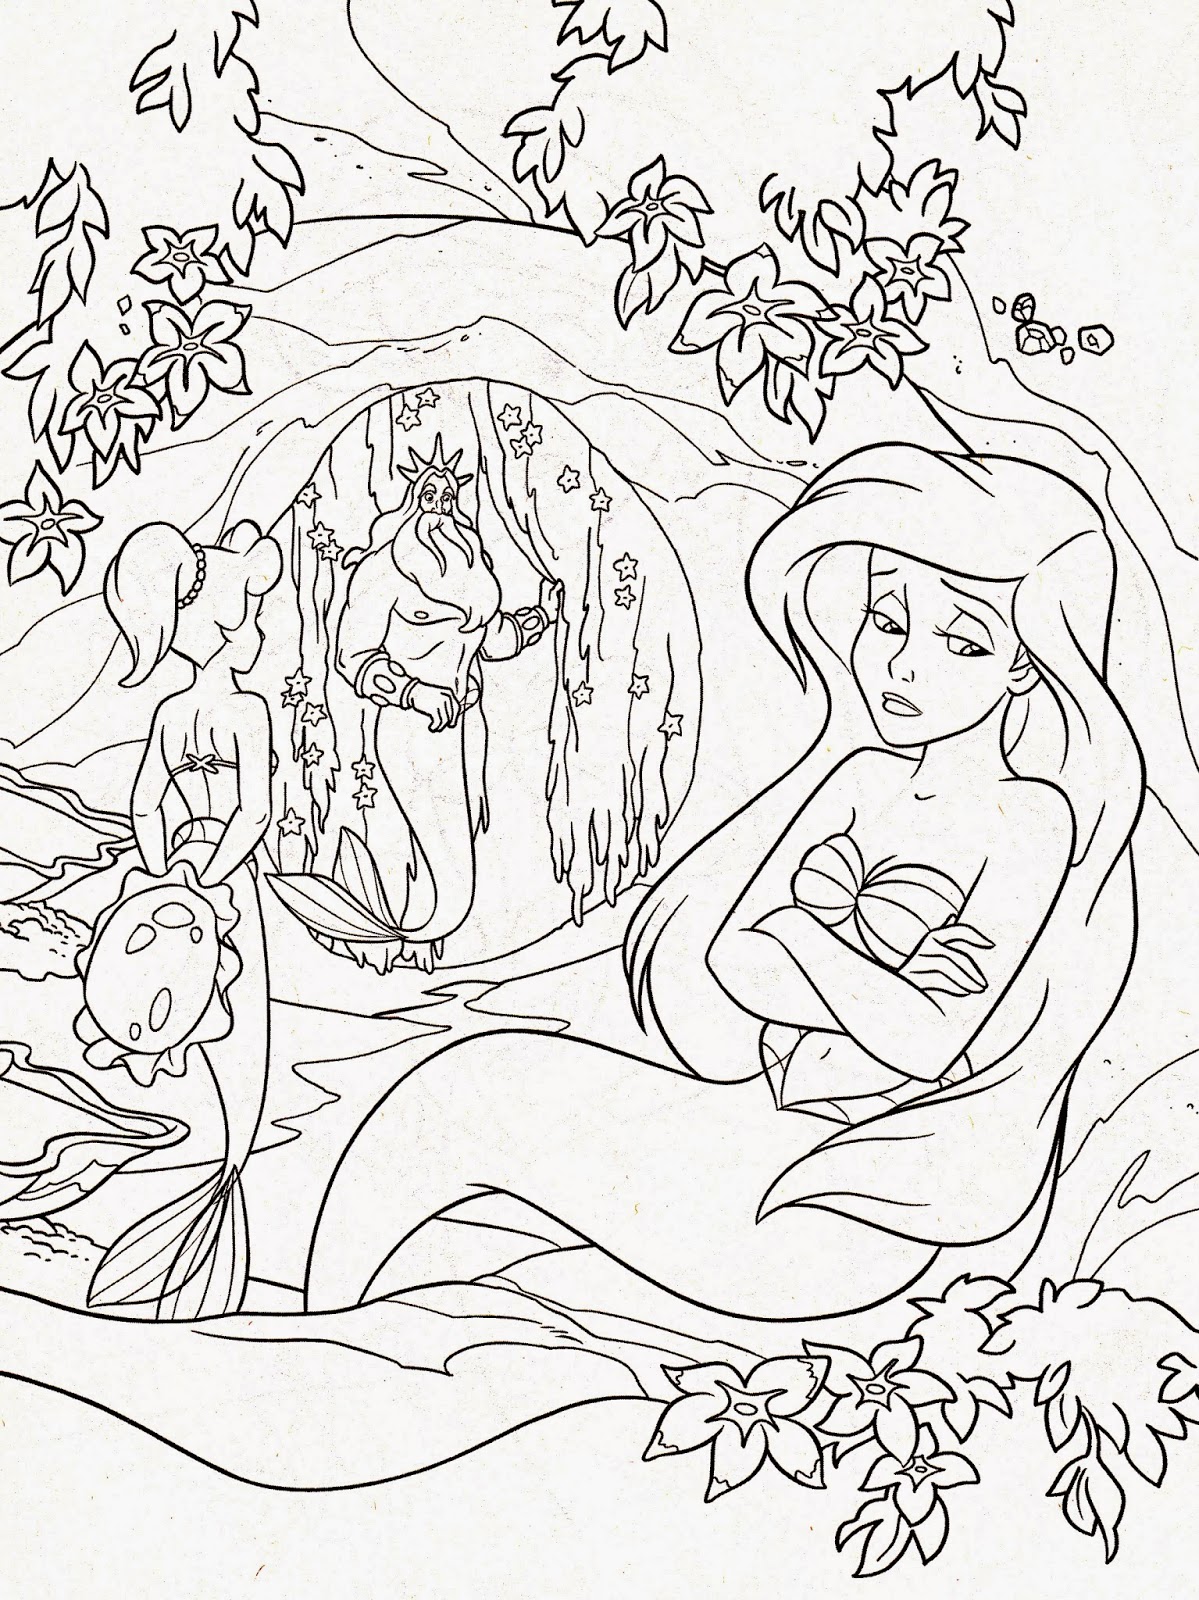 Download Coloring Pages: Disney Coloring Pages Free and Printable